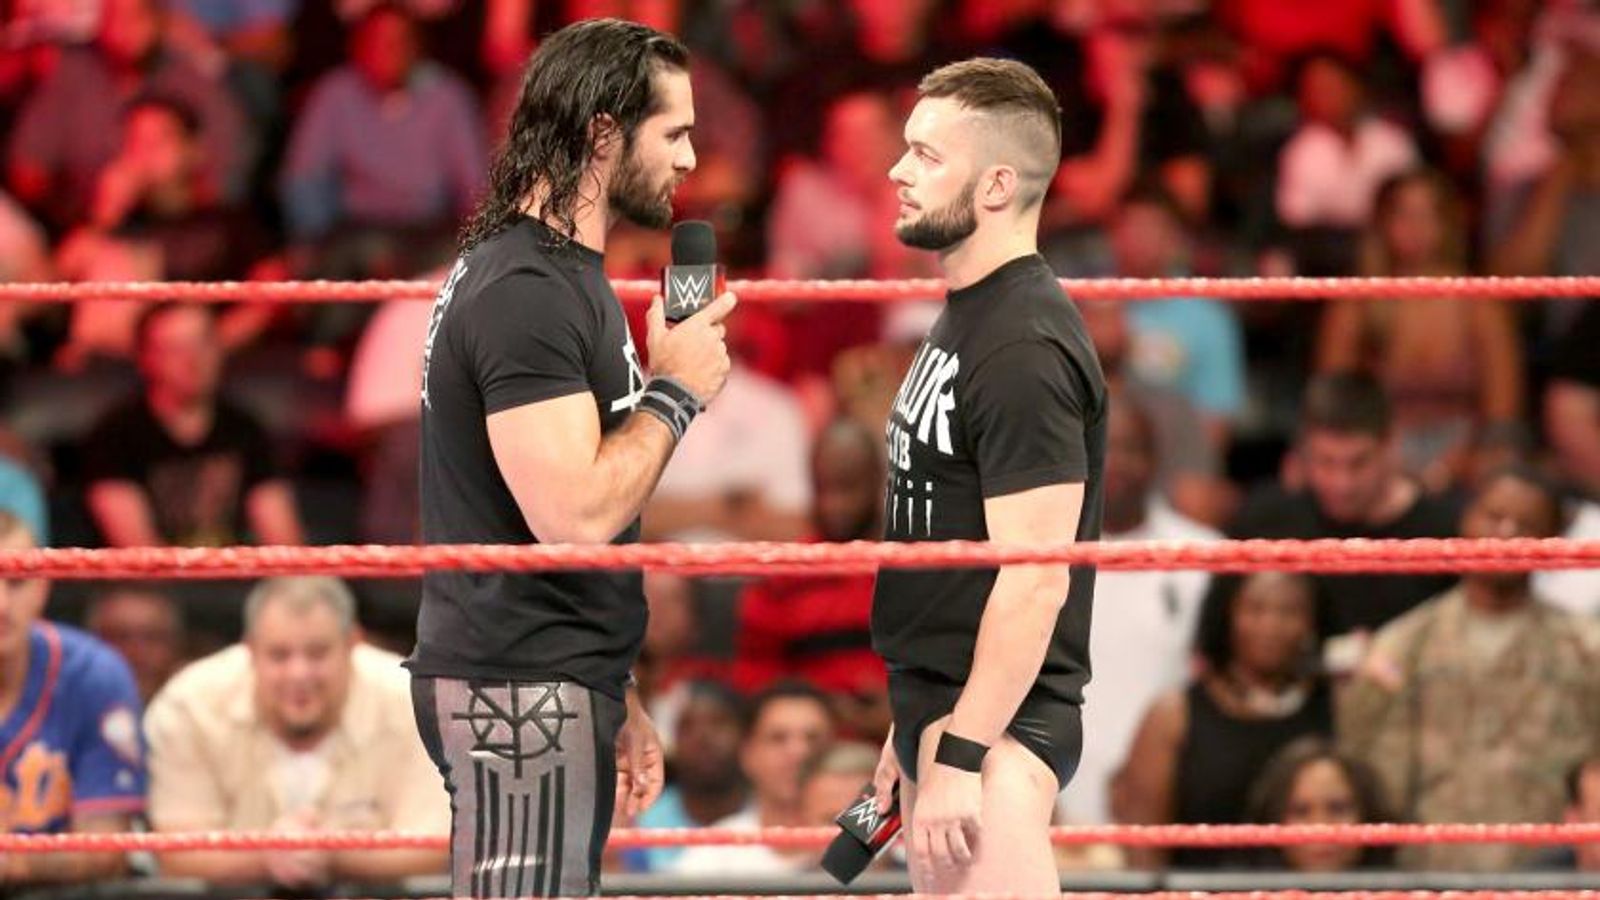 WWE Raw SummerSlam rivals Finn Balor and Seth Rollins come to blows